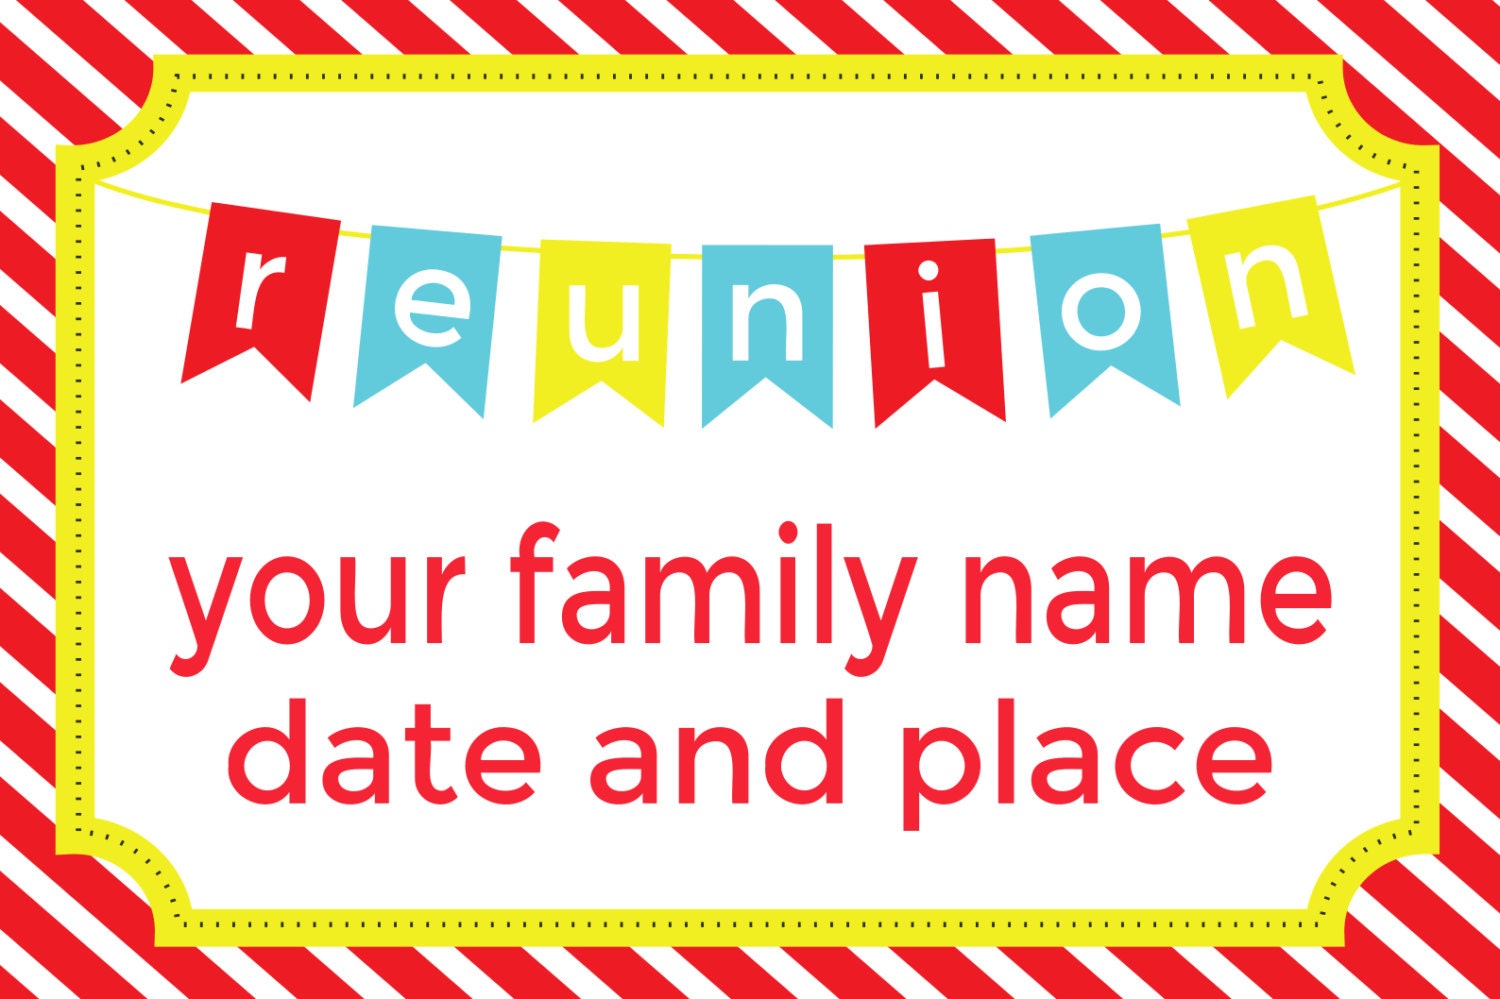 Family Reunion Banner with Stripes